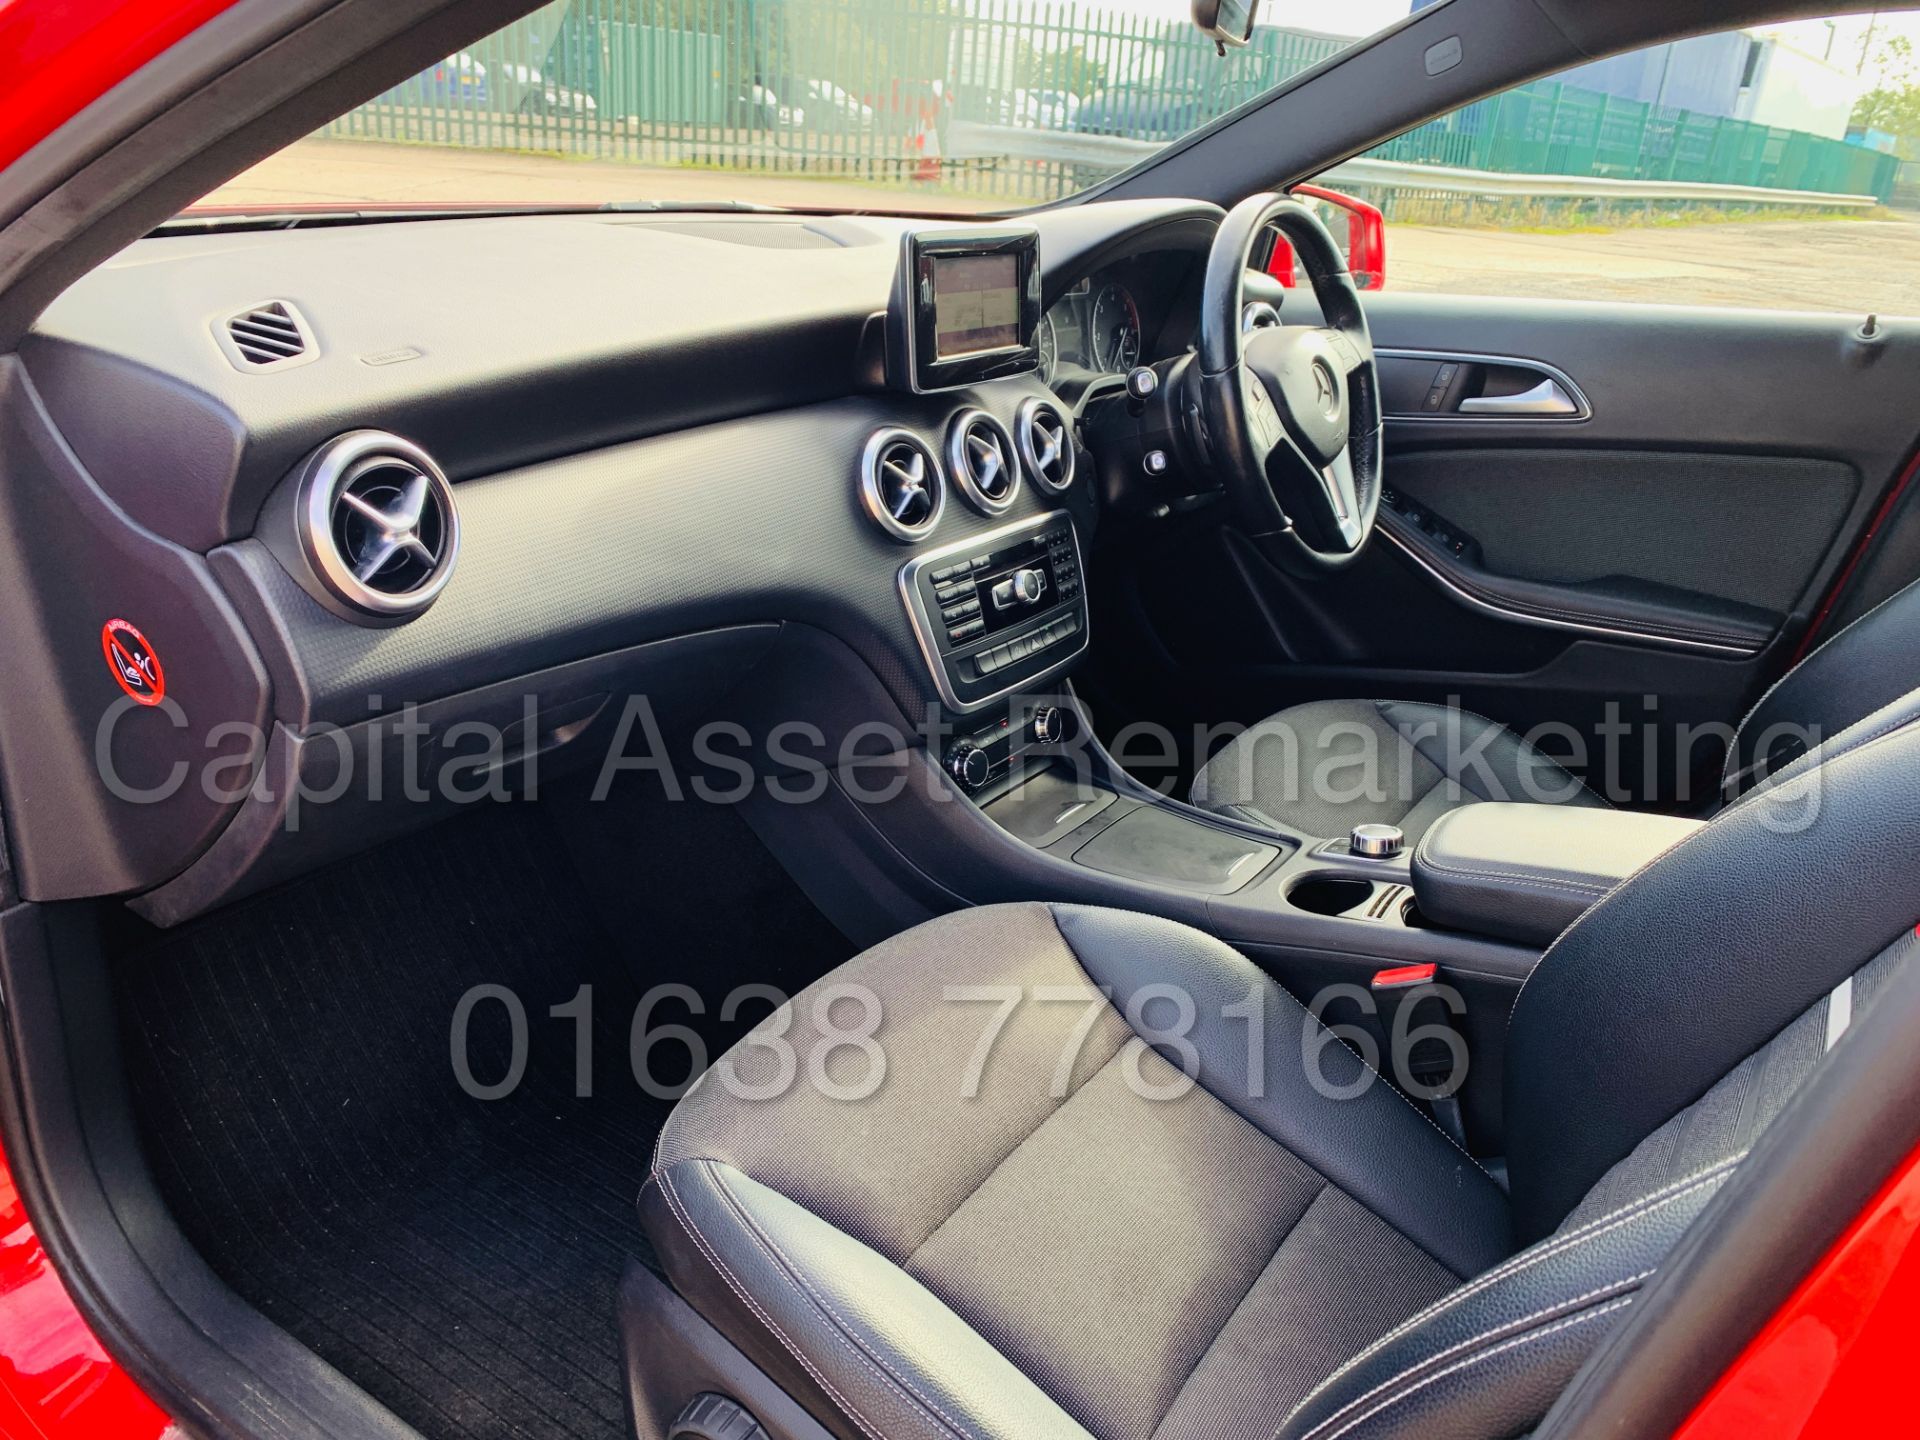 (ON SALE) MERCEDES-BENZ A180 *5 DOOR HATCHBACK* (2015 - NEW MODEL) '1.5 CDI - 7-G TRONIC AUTO' - Image 20 of 43